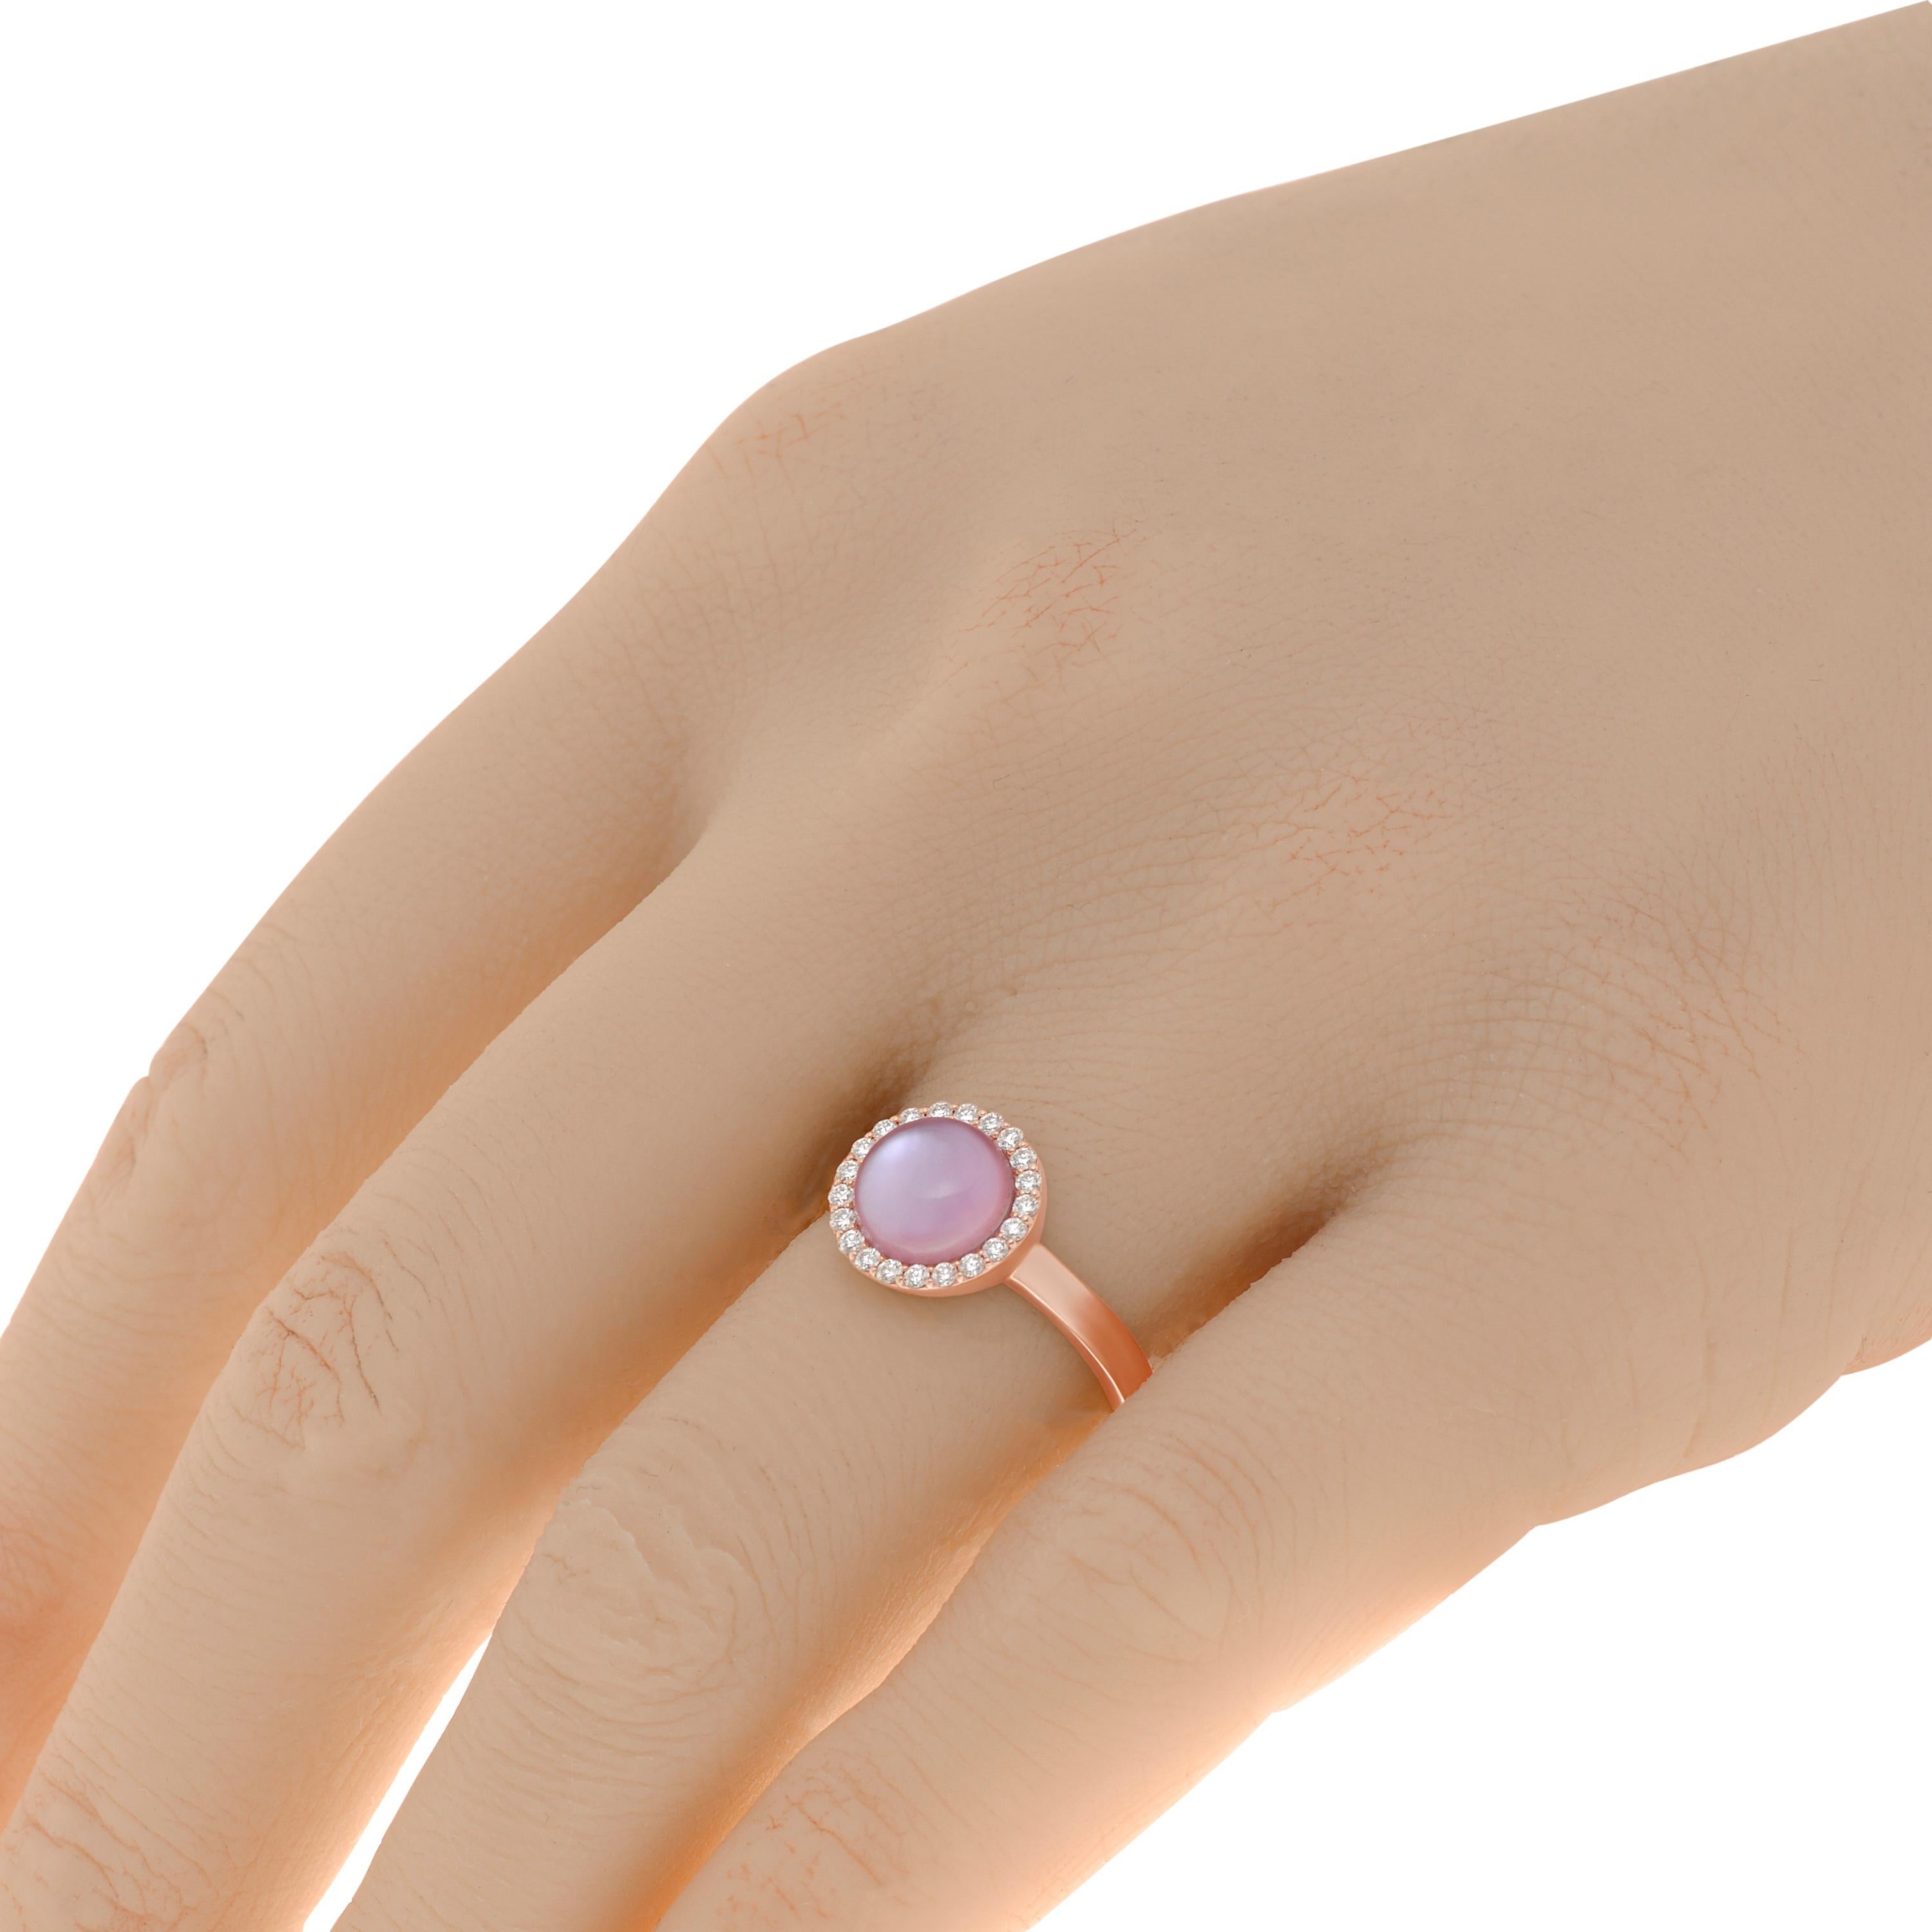 Roberto Coin 18K rose gold halo ring features 2.00ct. tw. cabochon amethyst shimmering with a 0.15ct. tw. white diamond halo. The ring size is 6.5 (53.1). The decoration size is 10mm. The weight is 4g.
